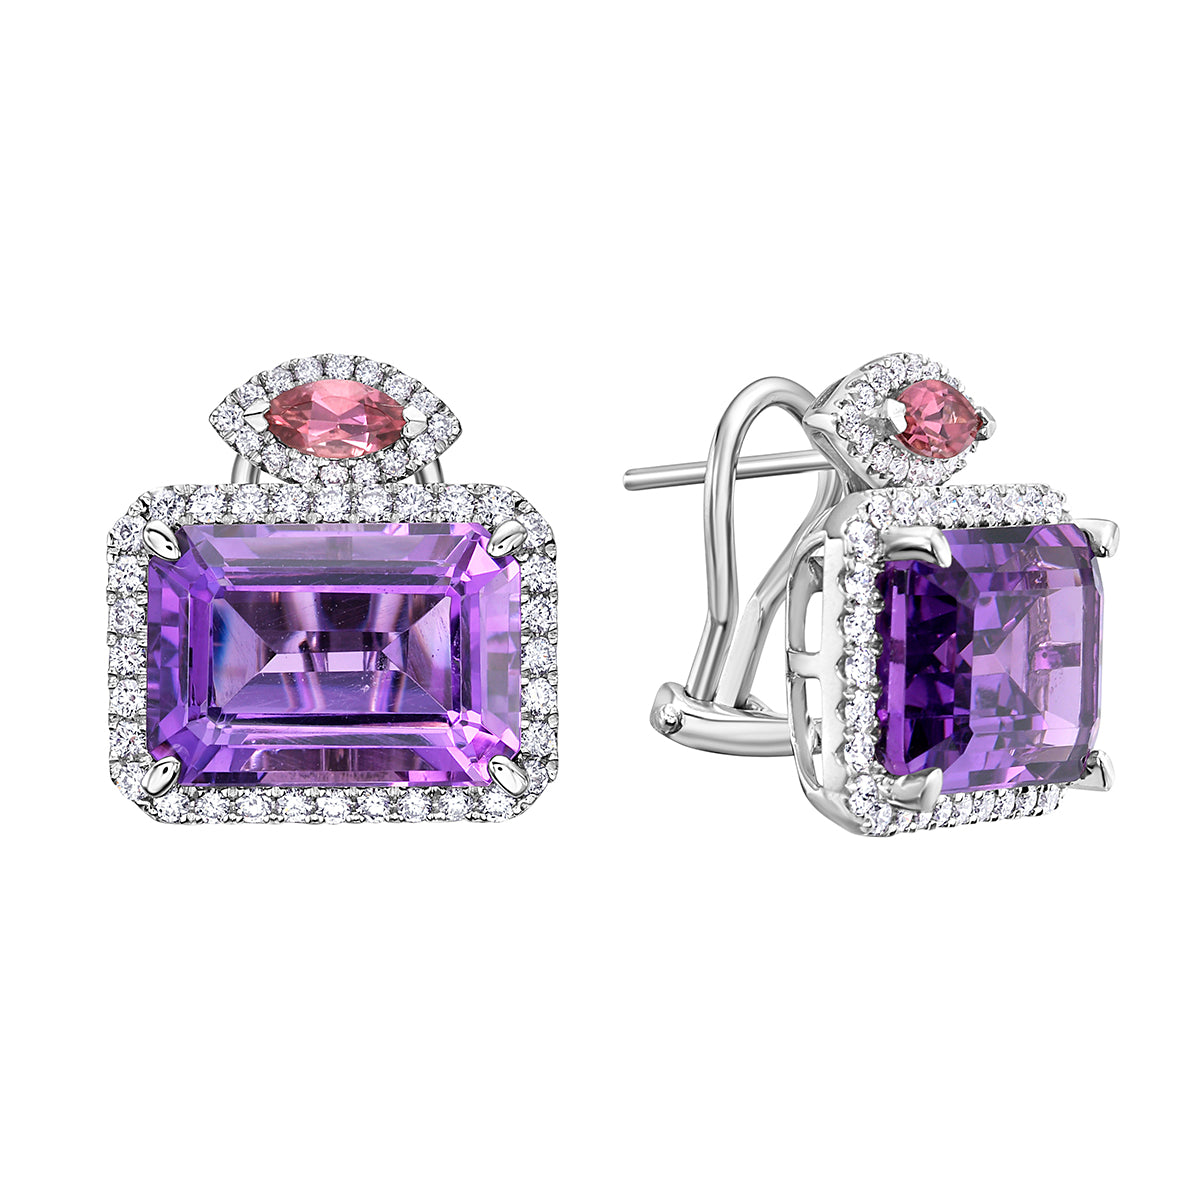 Earrings 14KW/6.7G 2AME-15.03CT 2PT-0.48CT 96RD-0.88CT Pink Tourmilinr and Ameth